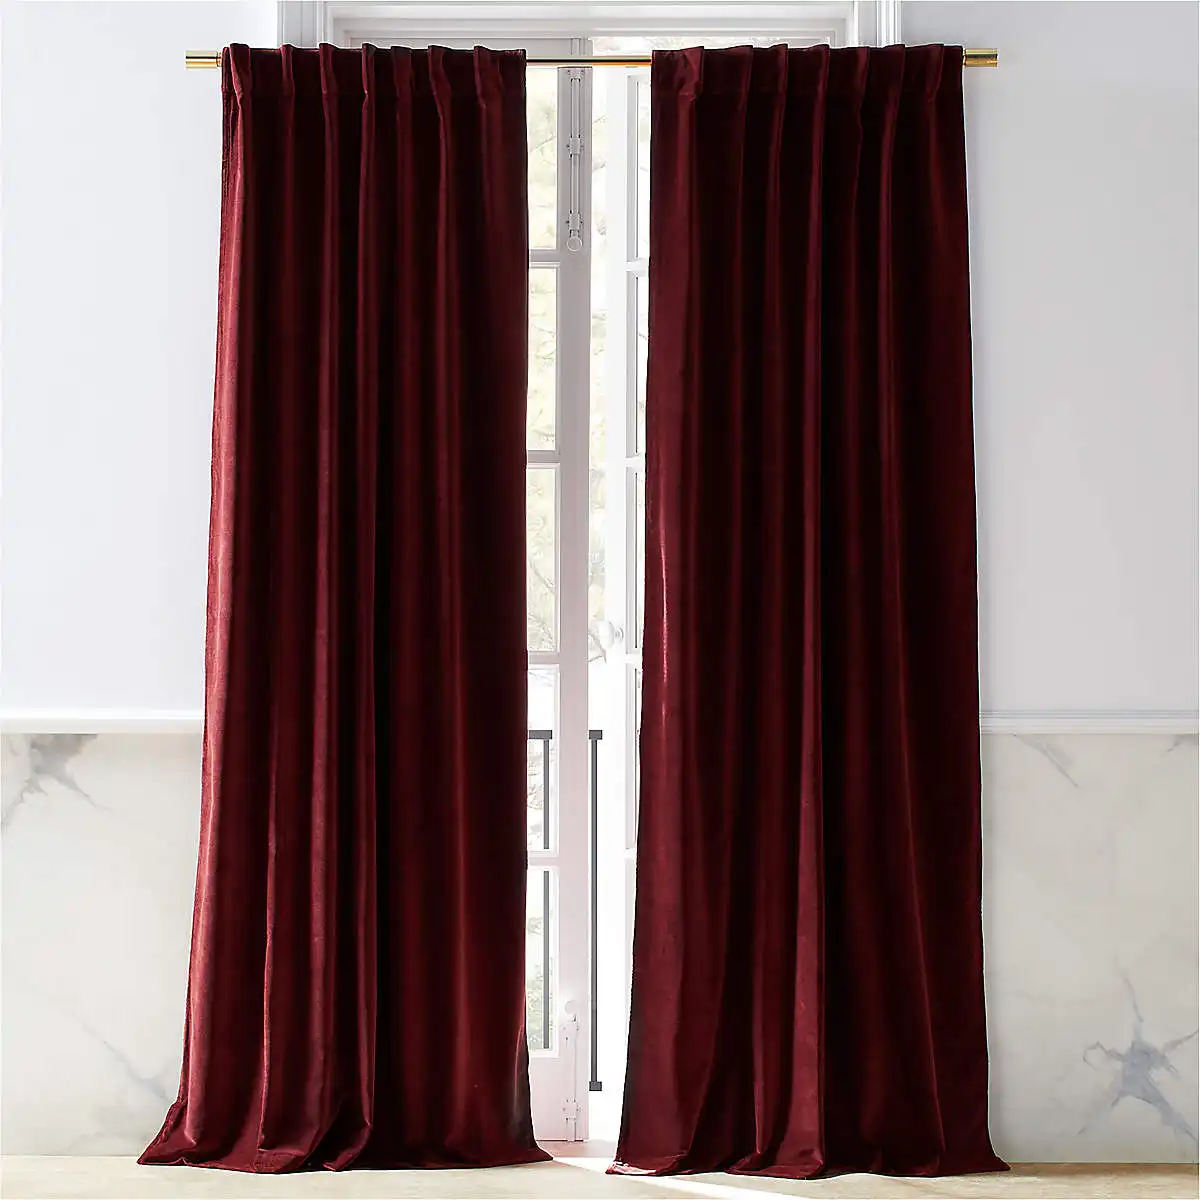 Solid Velvet Curtains Window Treatments Curtains & Drapes Rod Pocket Curtain Door Window Decoration For Living Room